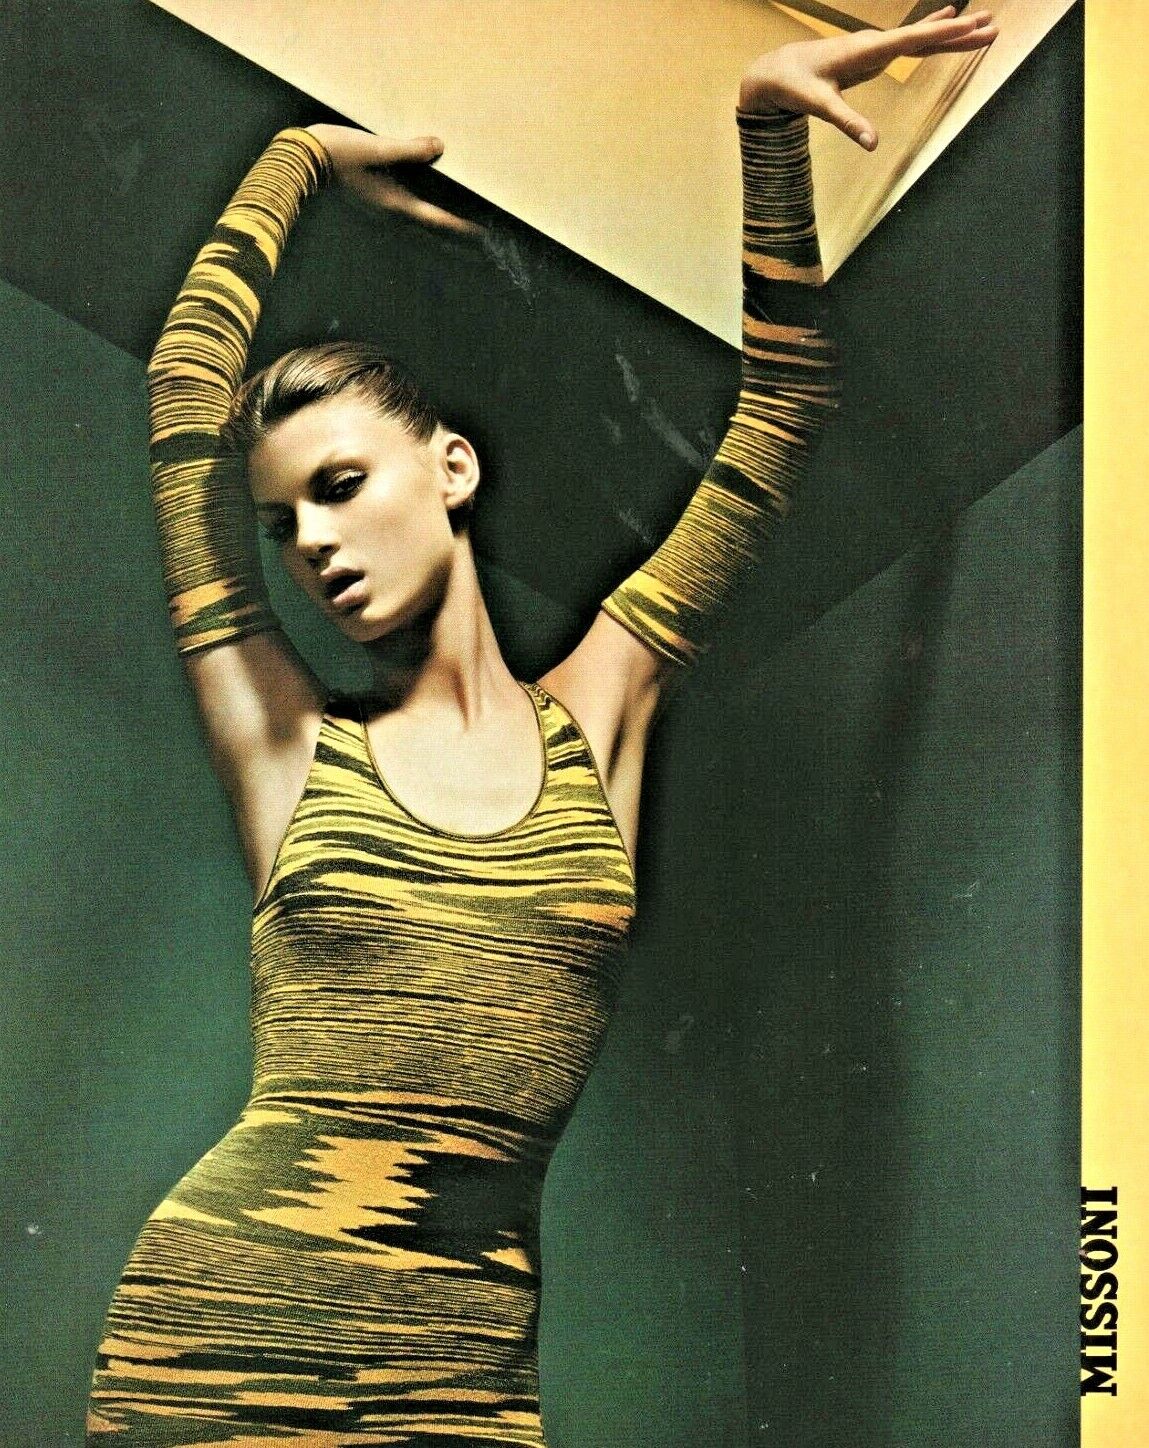 MISSONI vintage print ad from 2001 In Style yellow black stripe knit dress